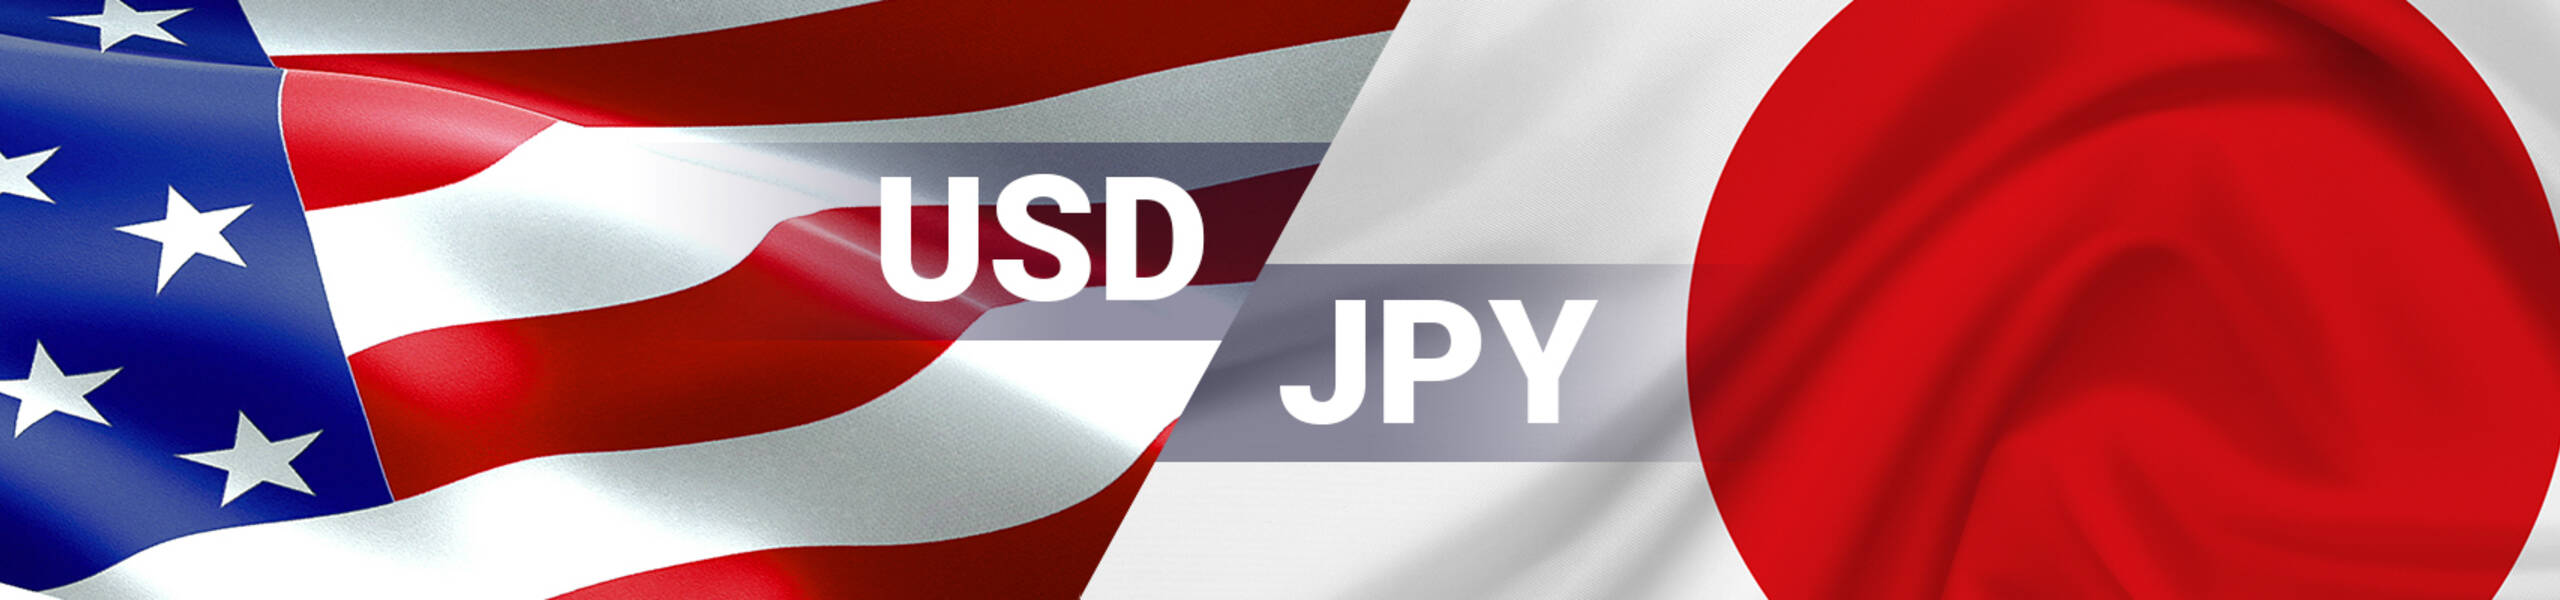 USD/JPY Dailyレポート 2017/07/19